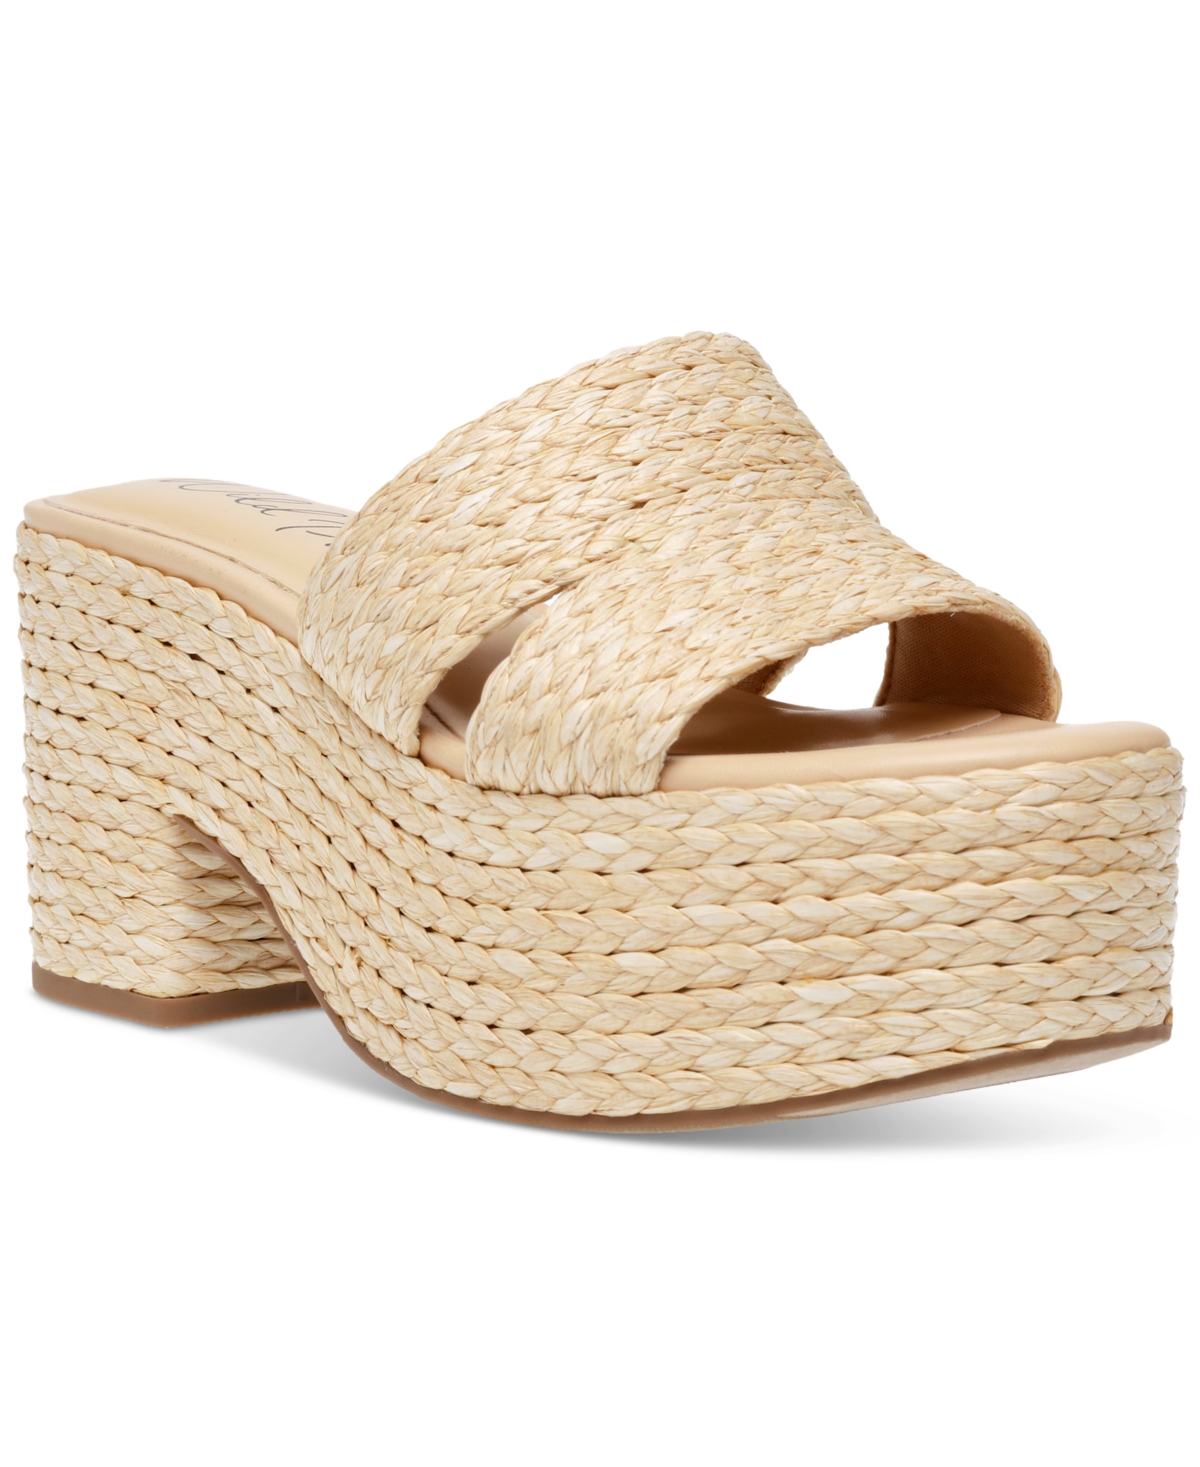 Niftyy Woven Espadrille Platform Wedge Slide Sandals, Created for Macy's - Pink Raffia